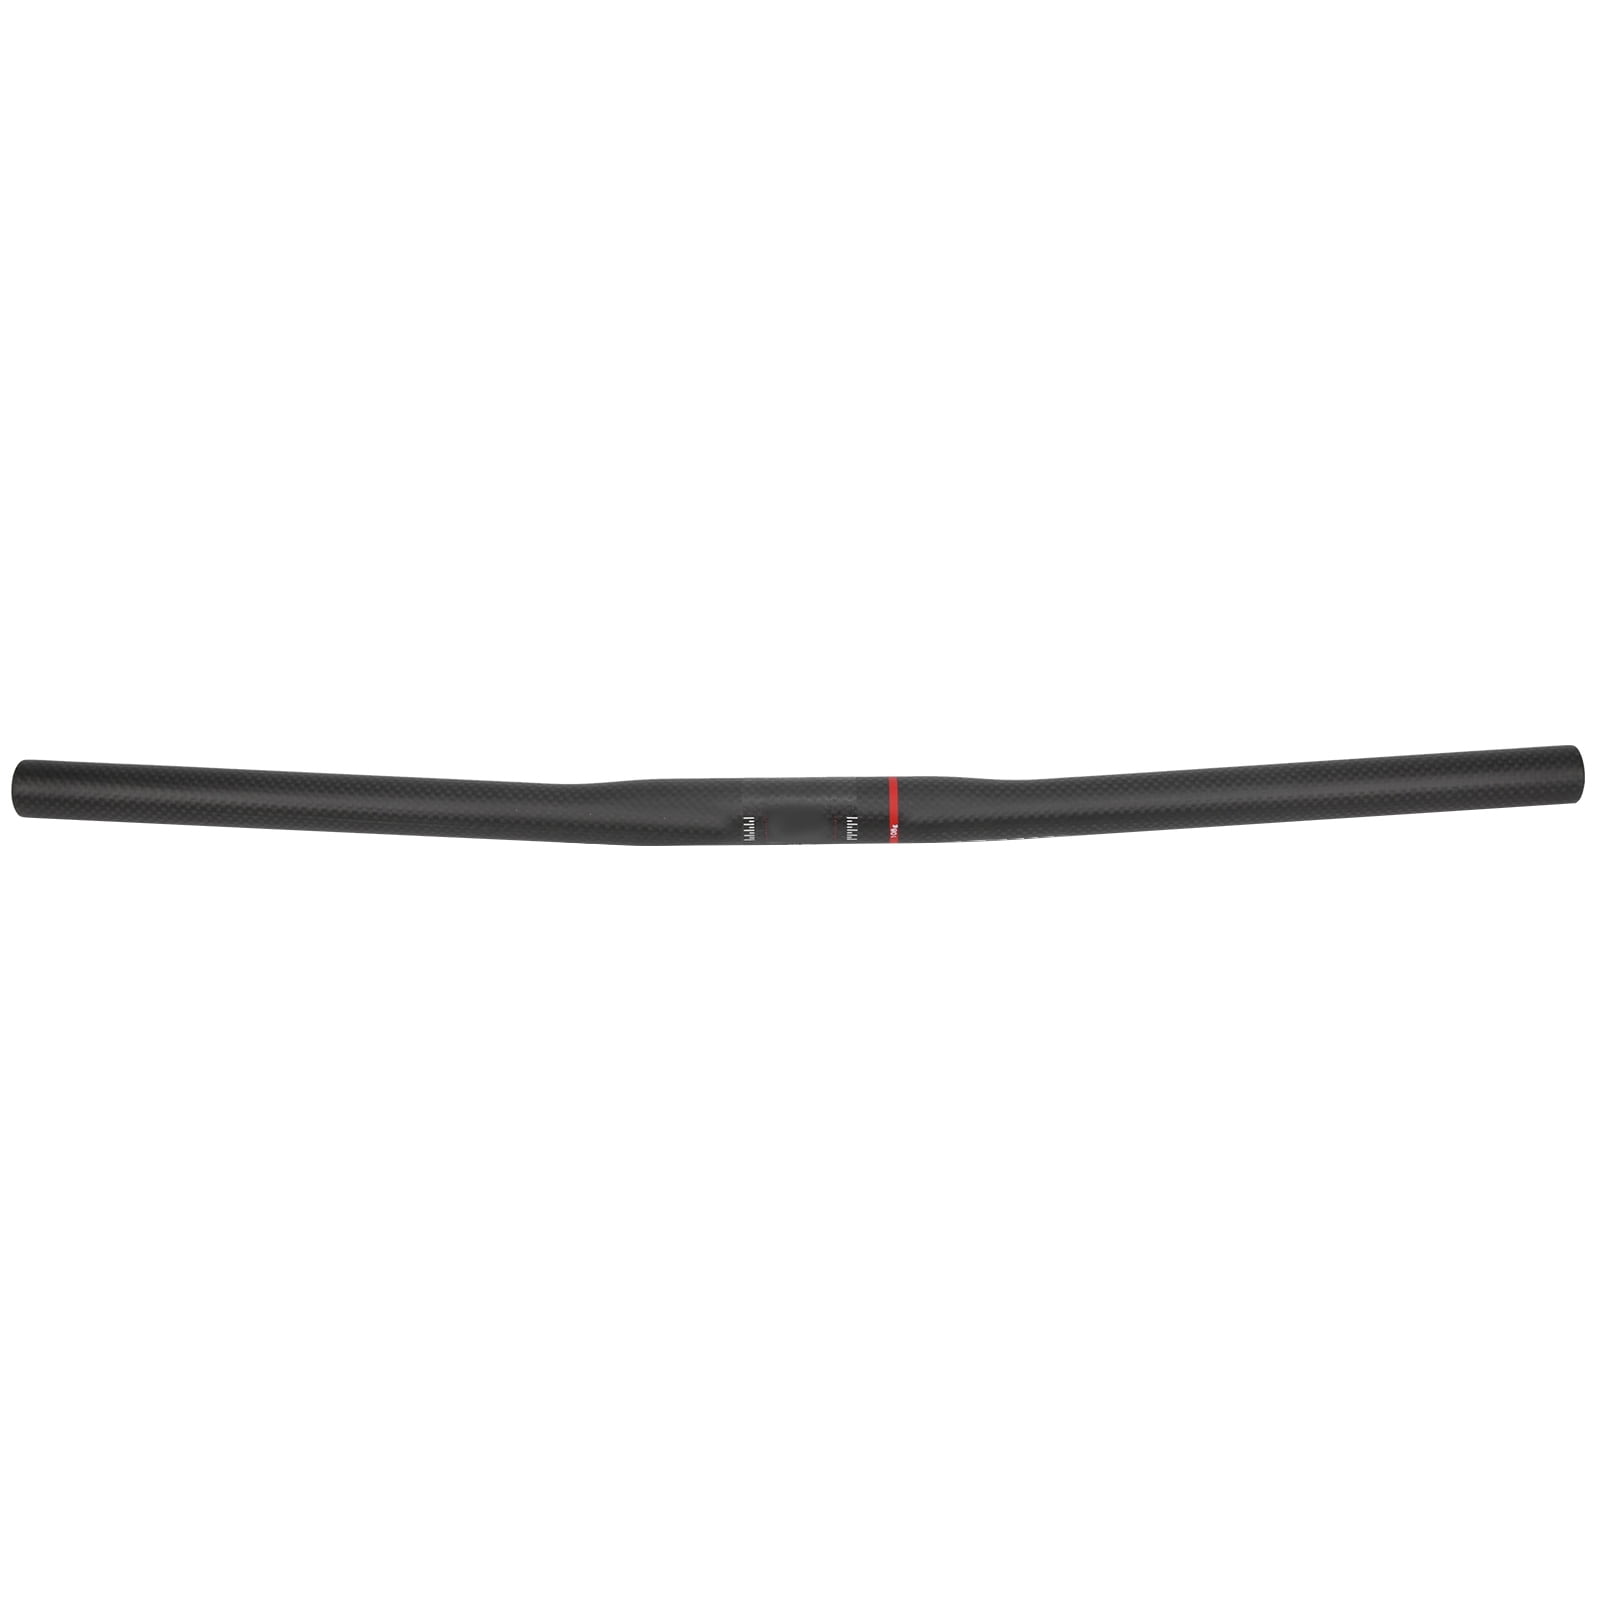 Carbon Folding Bicycle Straight Handlebar 25.4x580MM Bike Cycling Accessory Part